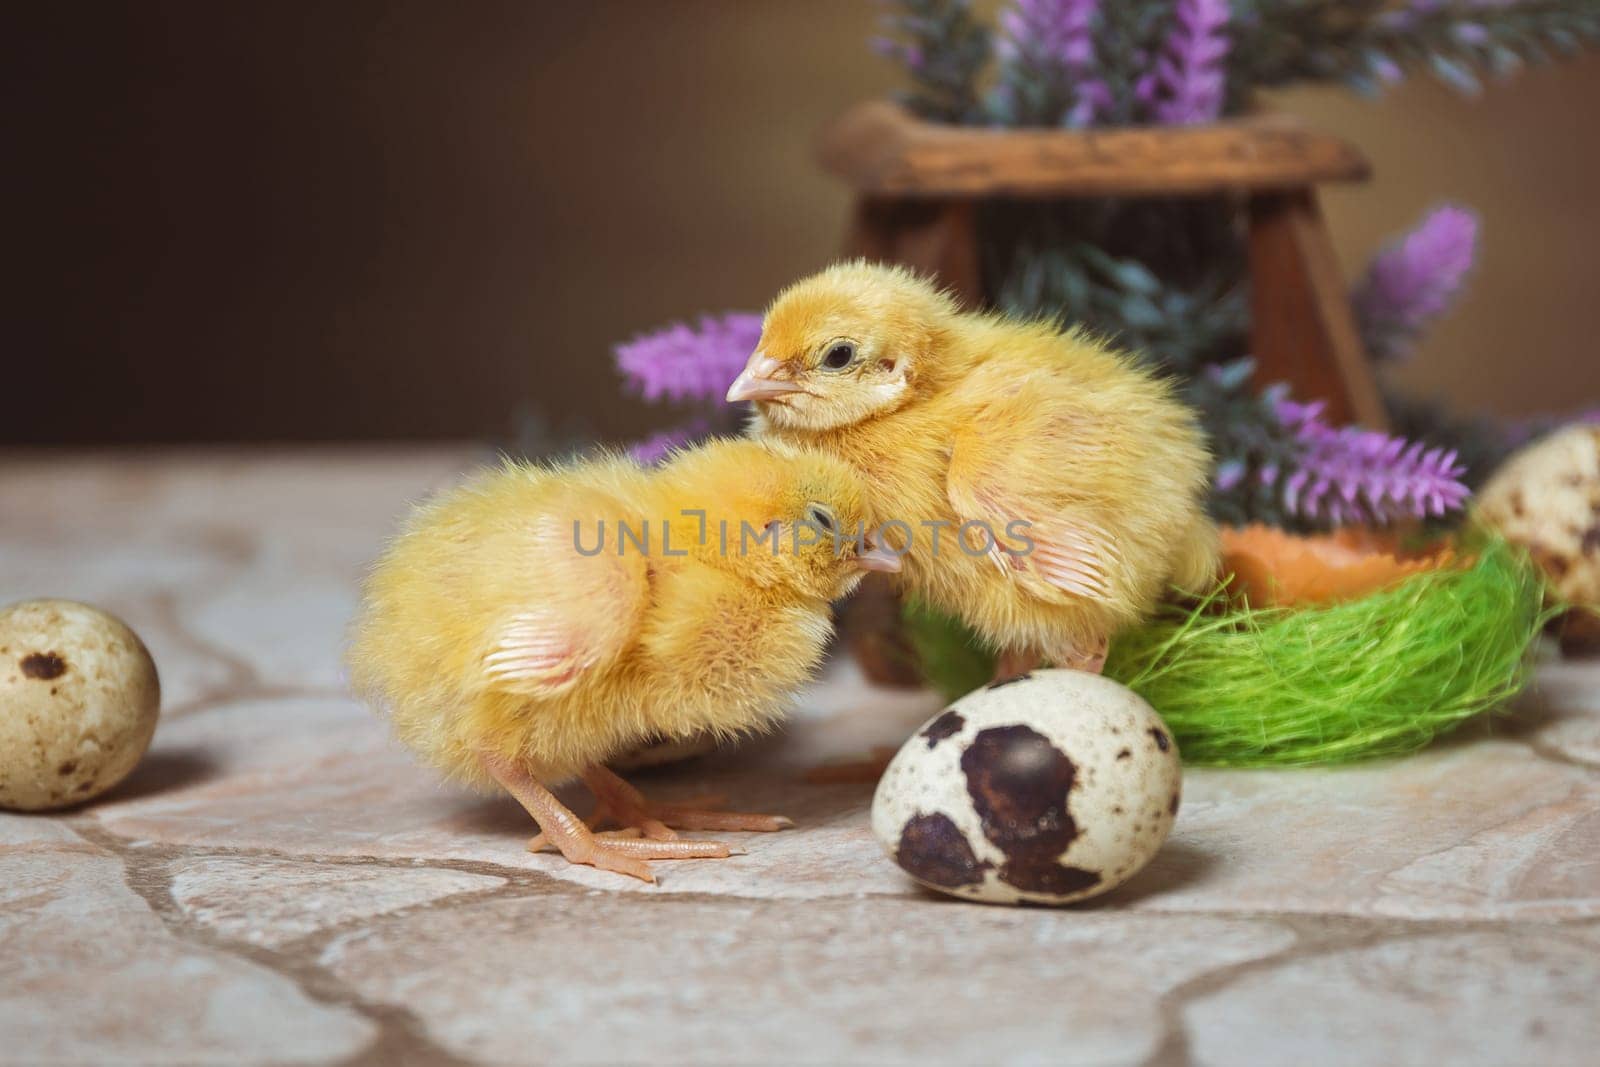 Two cute yellow quail chicks are standing side by side snuggled up to each other